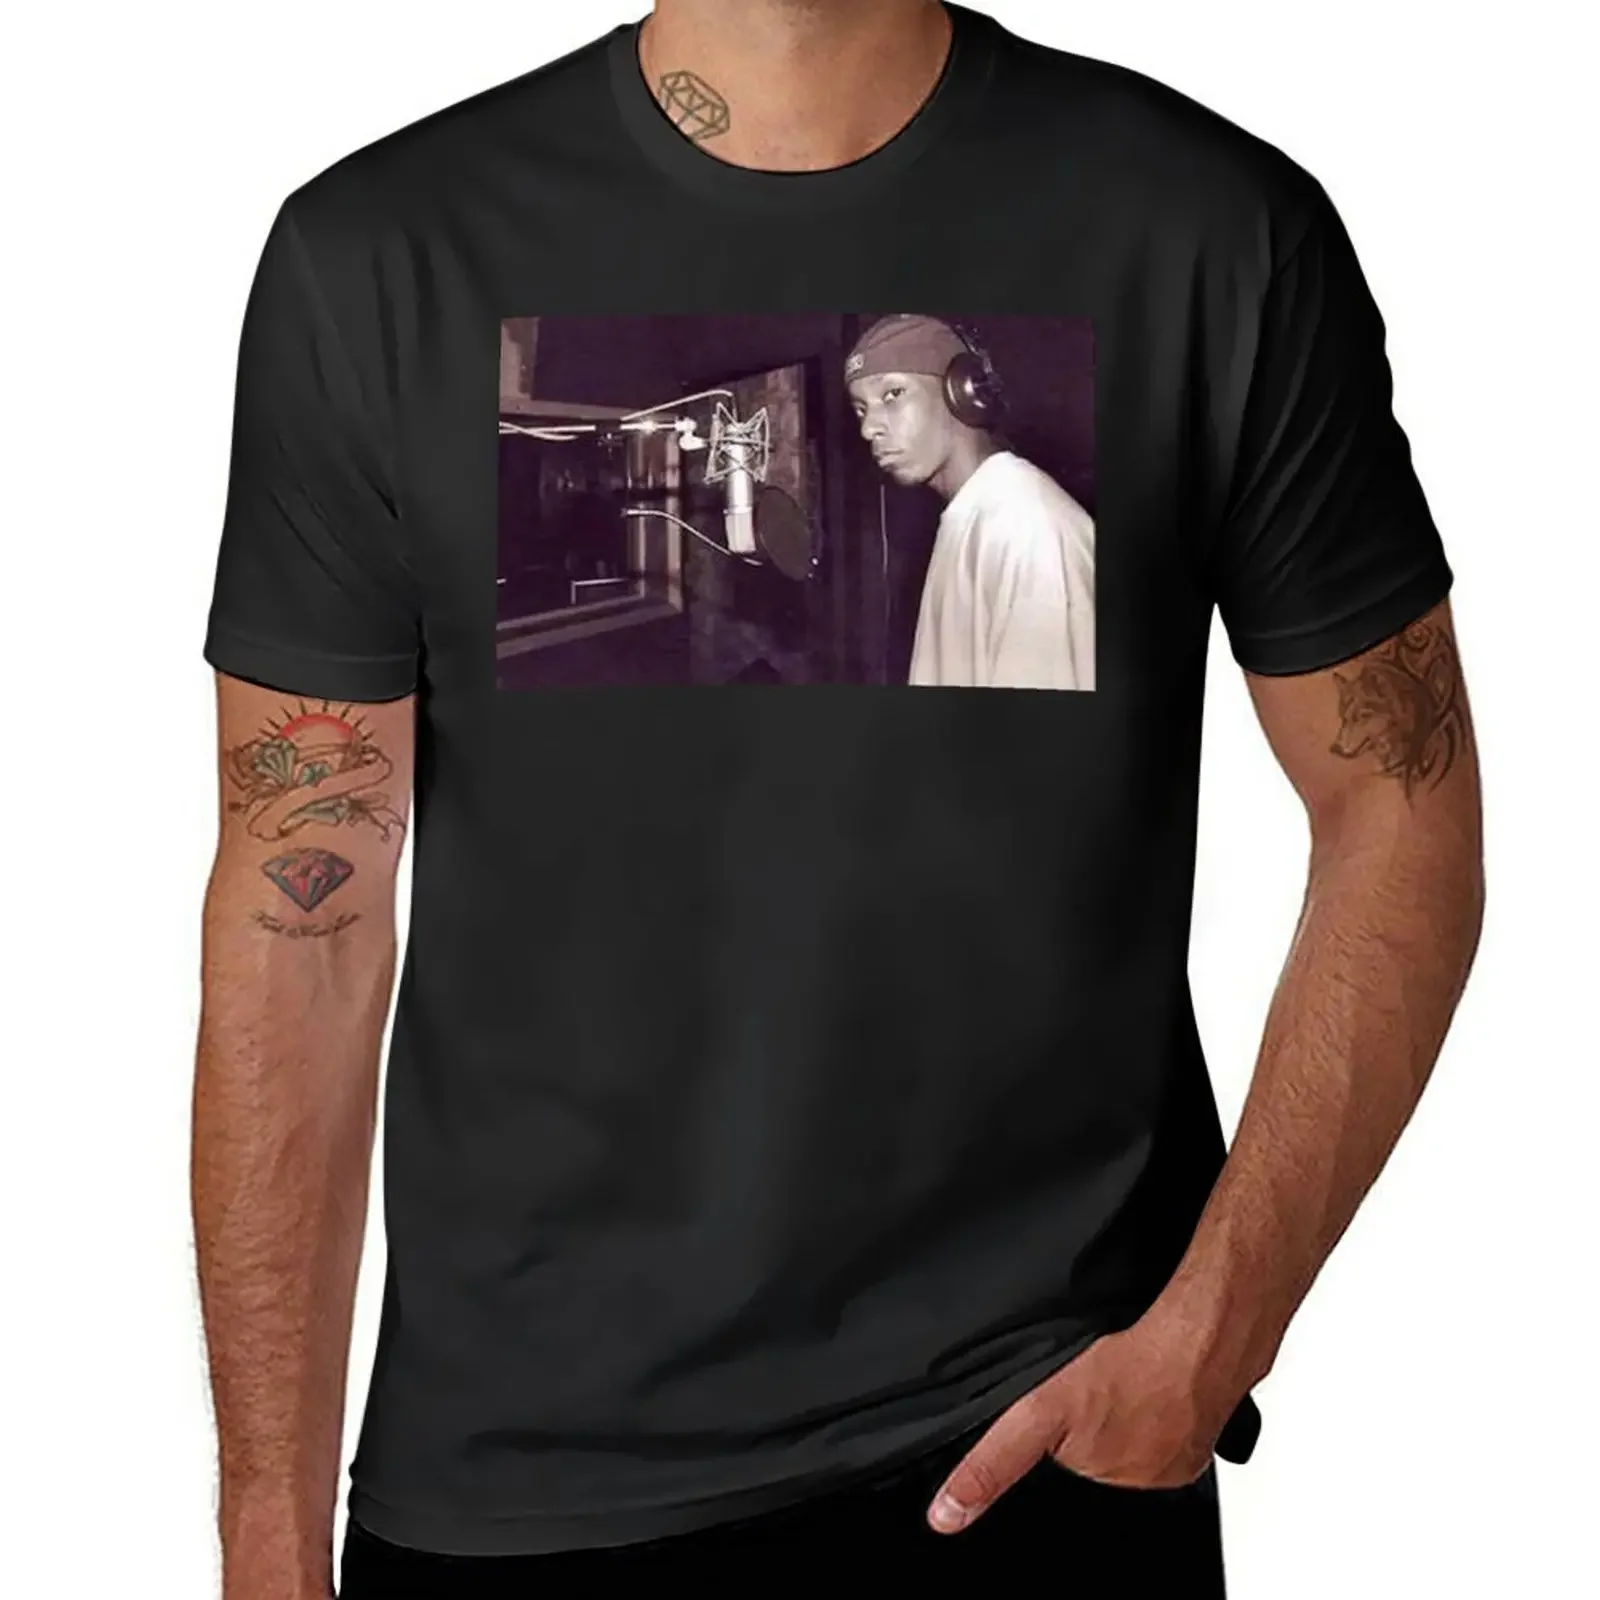 

BIG L IN THE STUDIO T-Shirt blanks for a boy T-shirts for men cotton